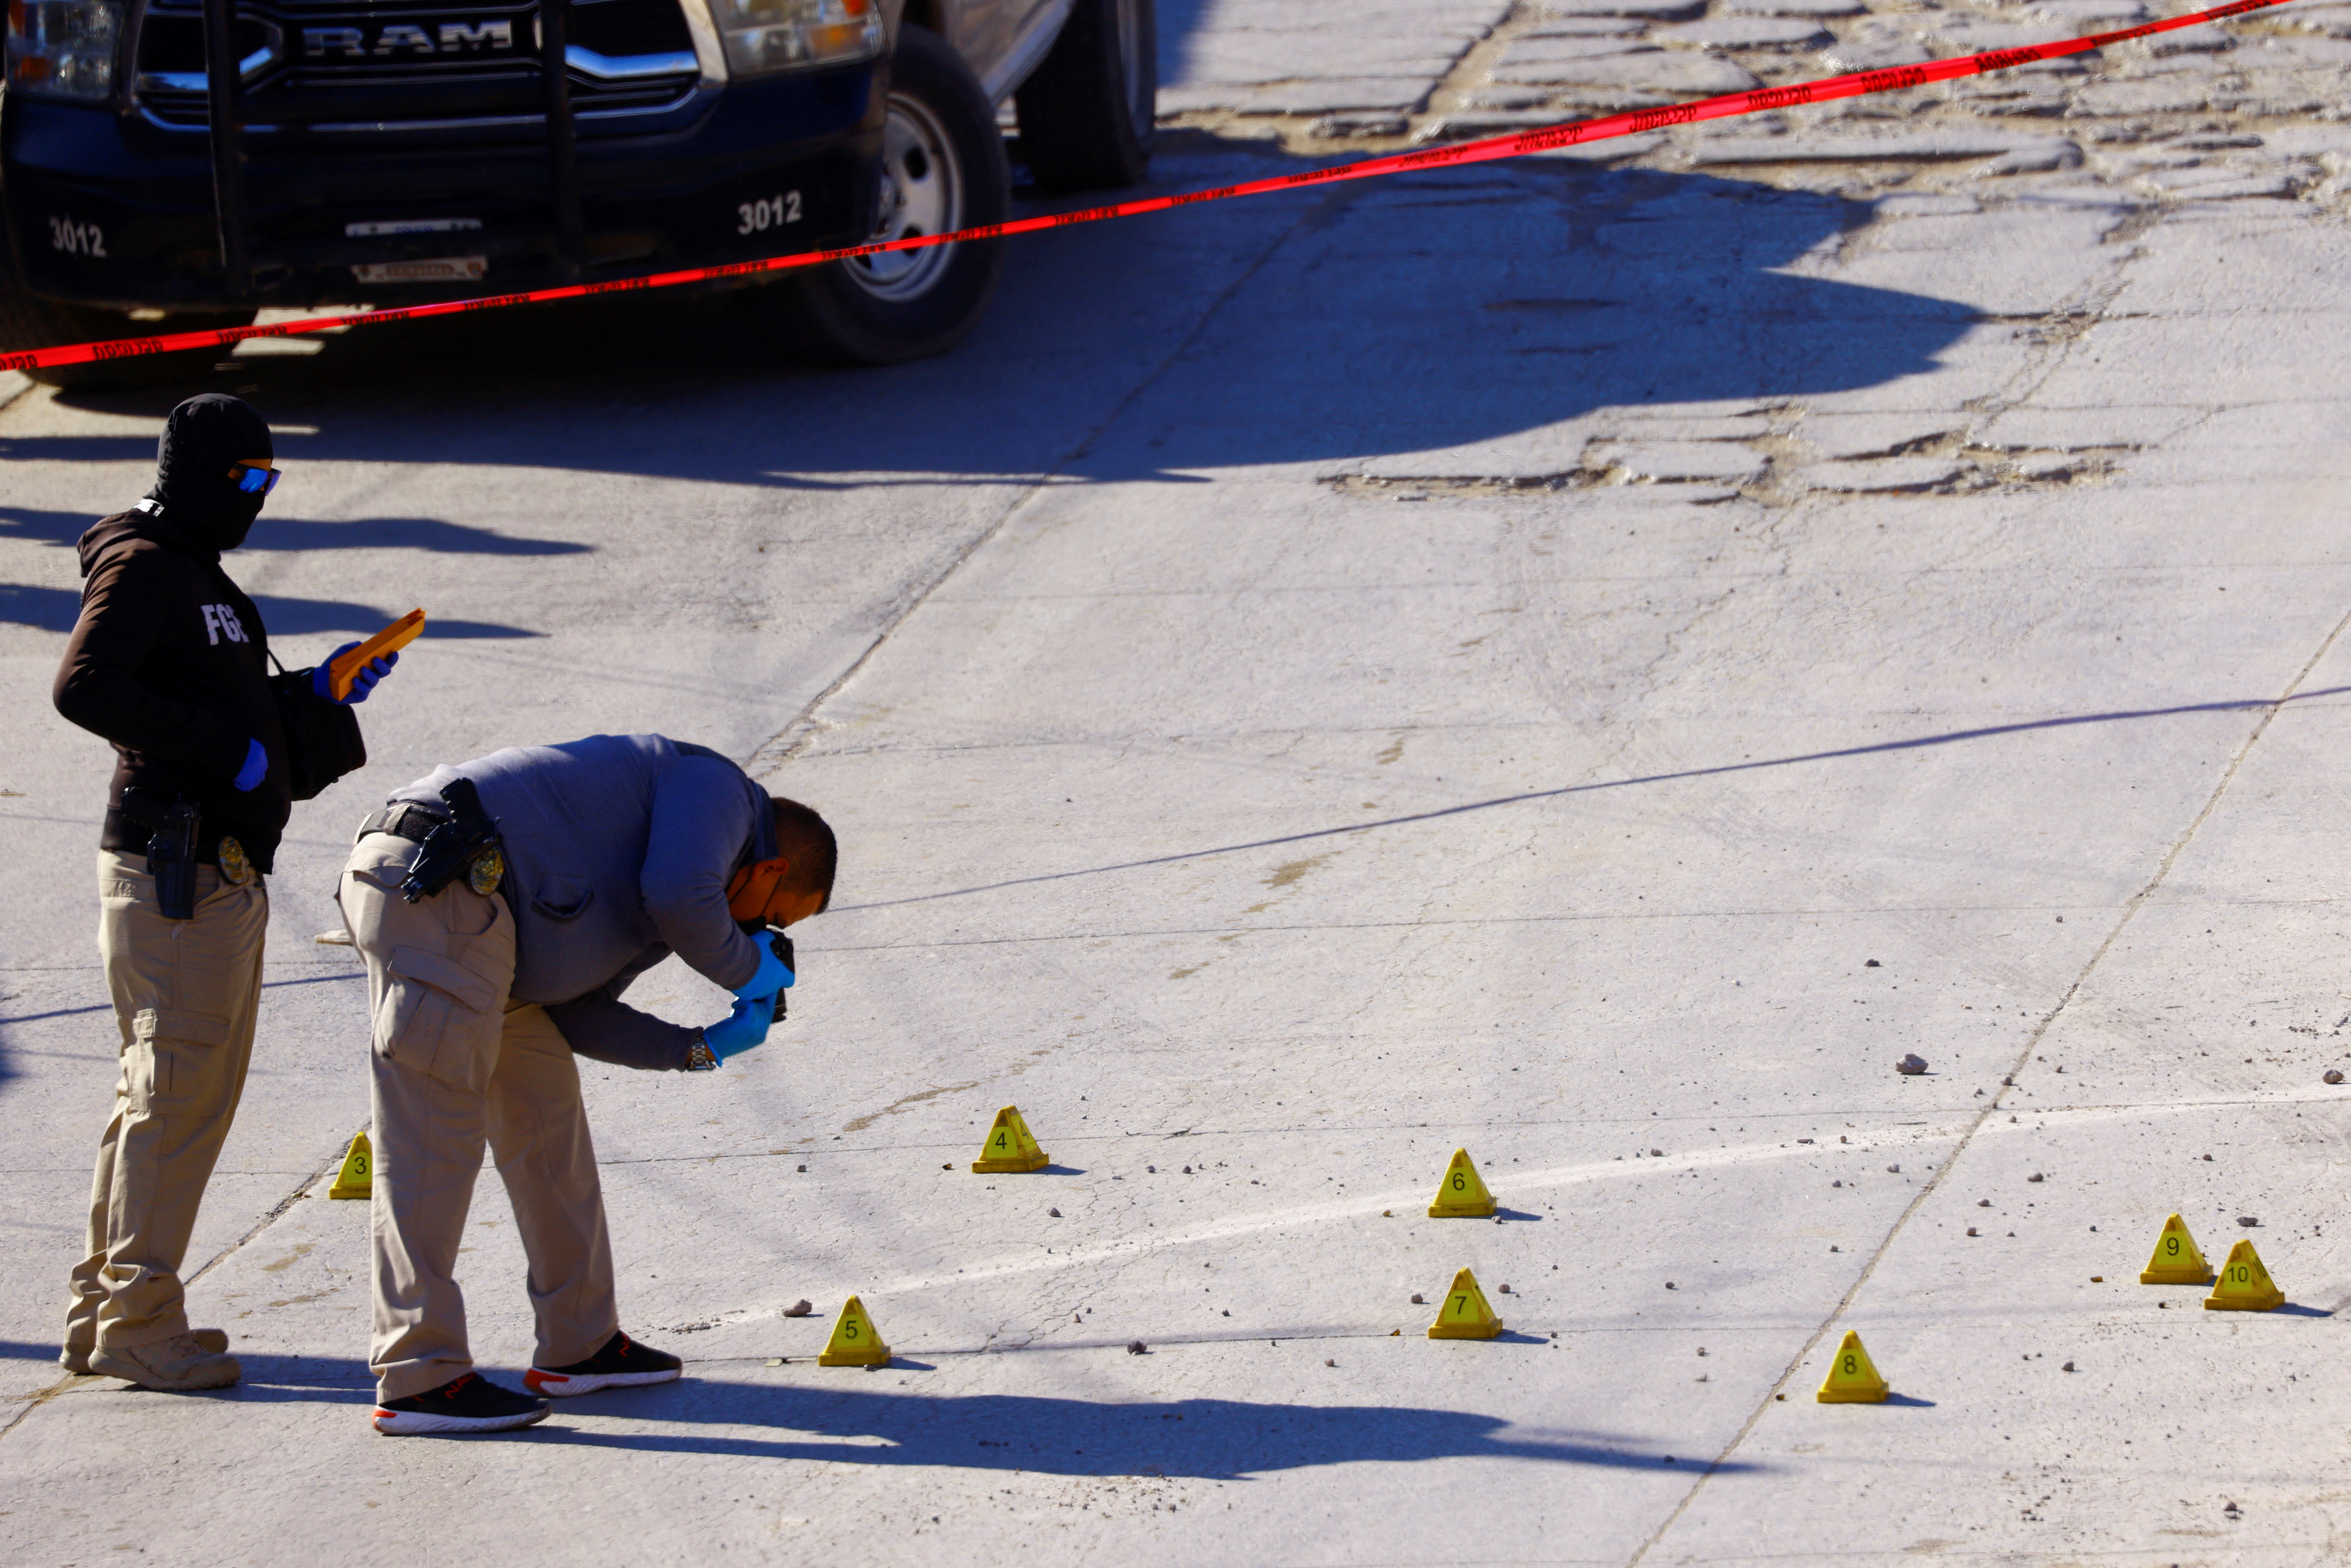 Forensic technicians work at the crime scene where unknown assailants killed four people during a wake, according to local media, in Ciudad Juarez, Mexico February 12, 2022. REUTERS/Jose Luis Gonzalez